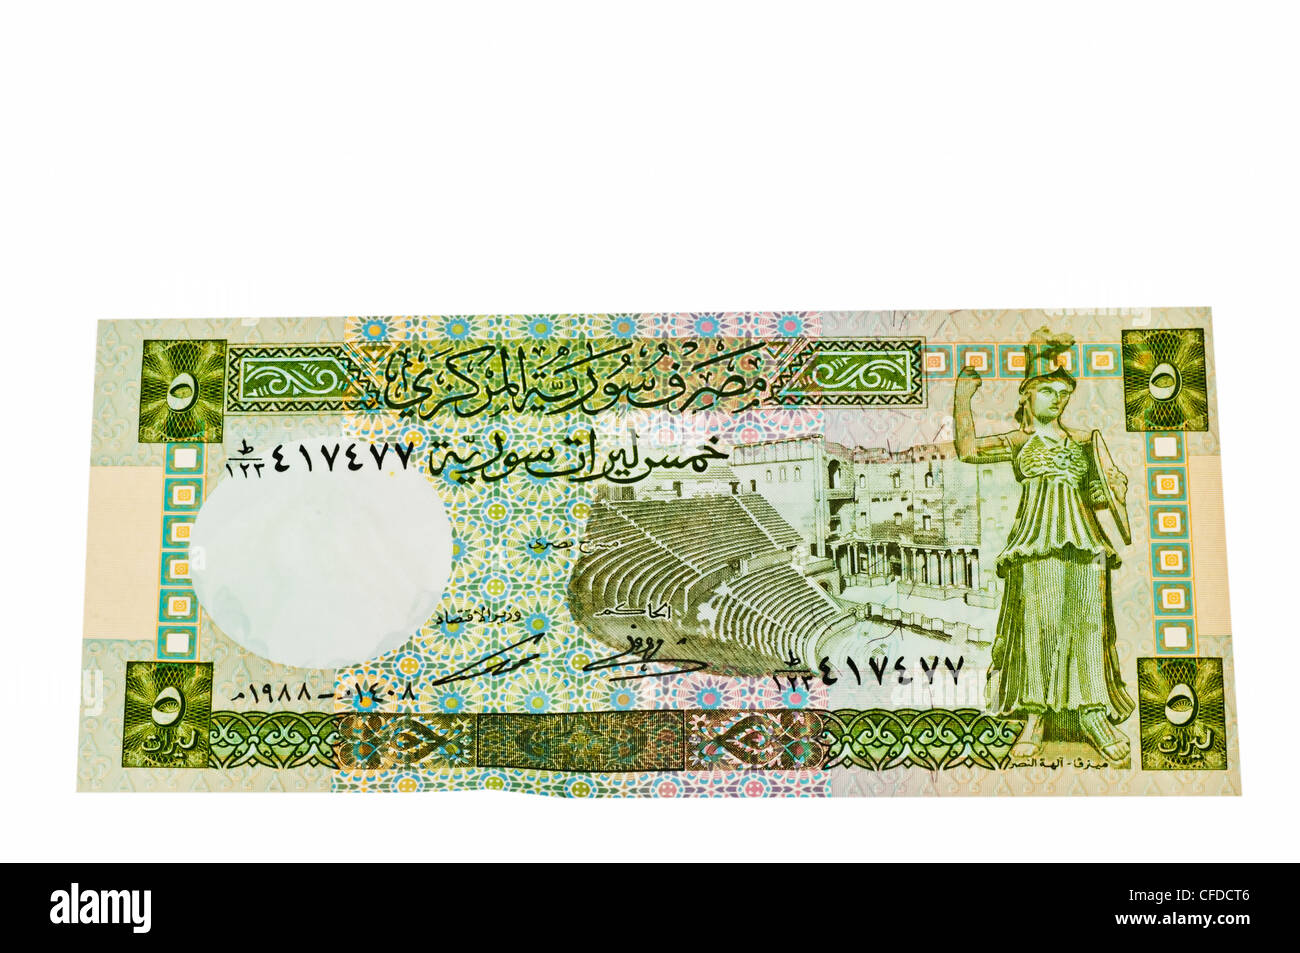 Currency of Syria 5 Pound Stock Photo